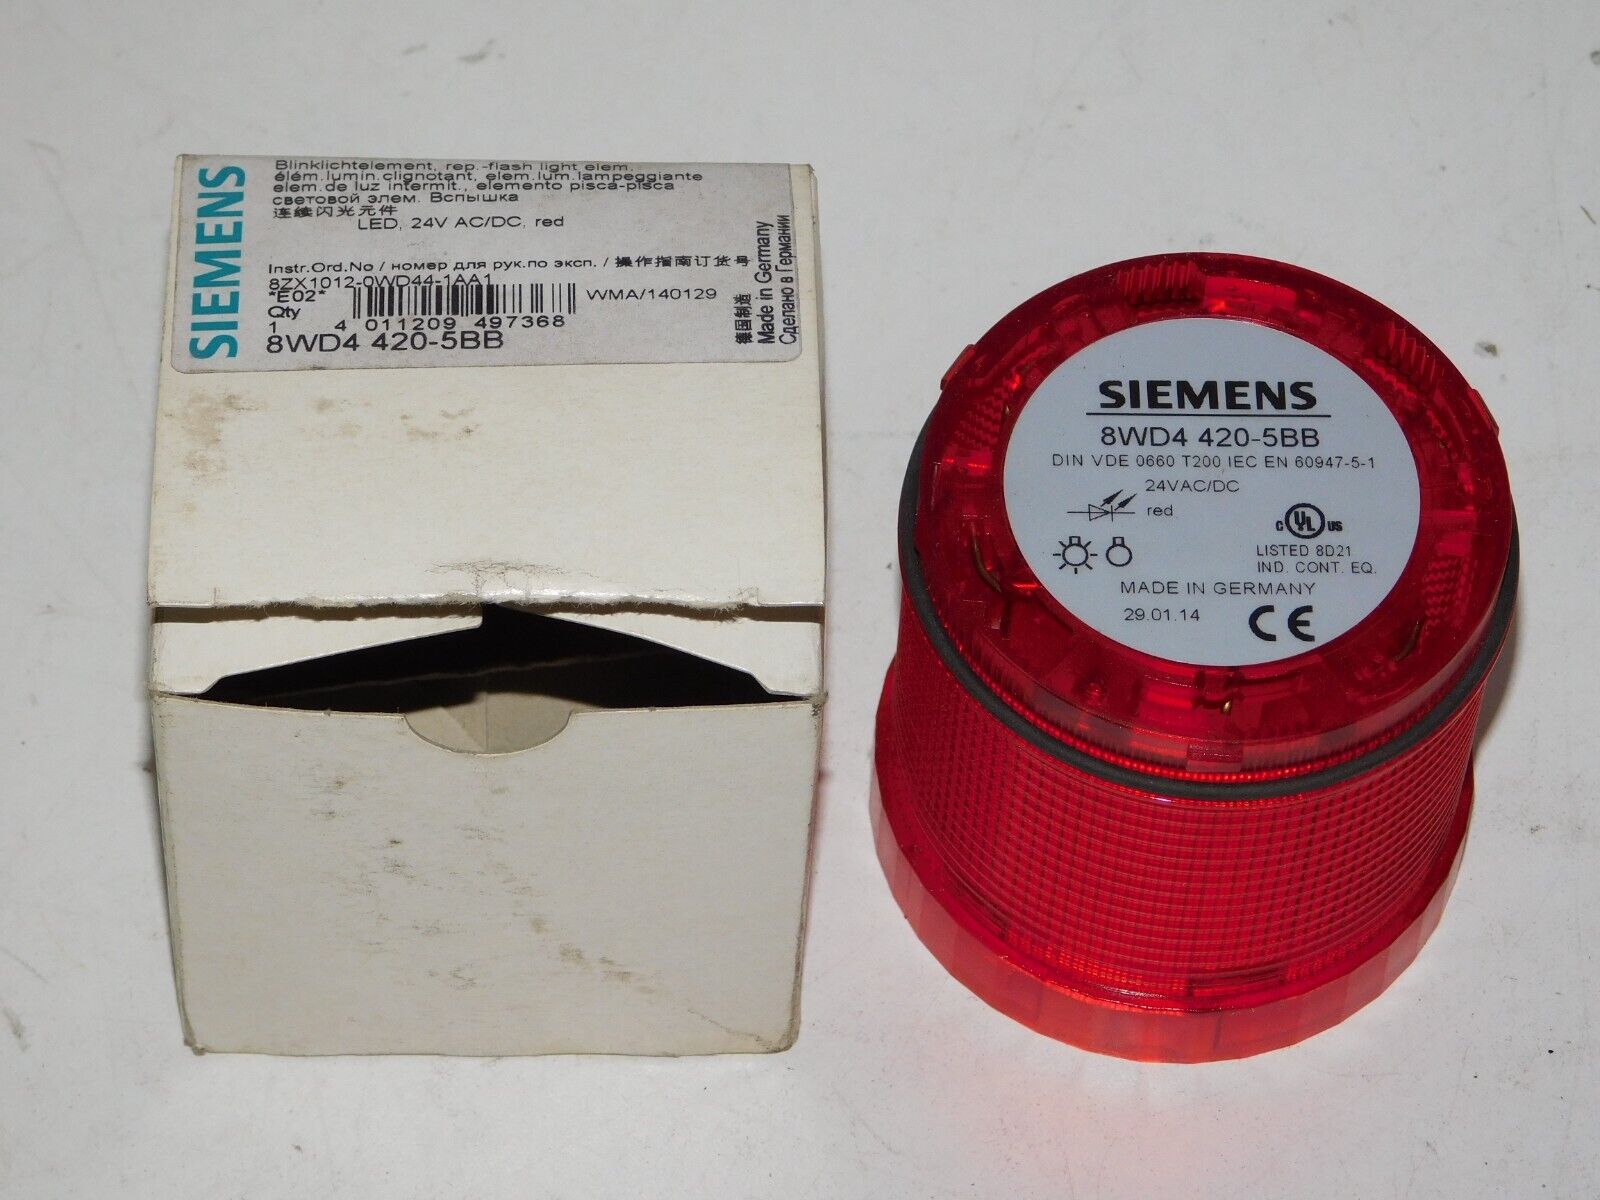 New Siemens 8WD4 420-5BB Replacement Flash Light 24V AC/DC Industrial Germany